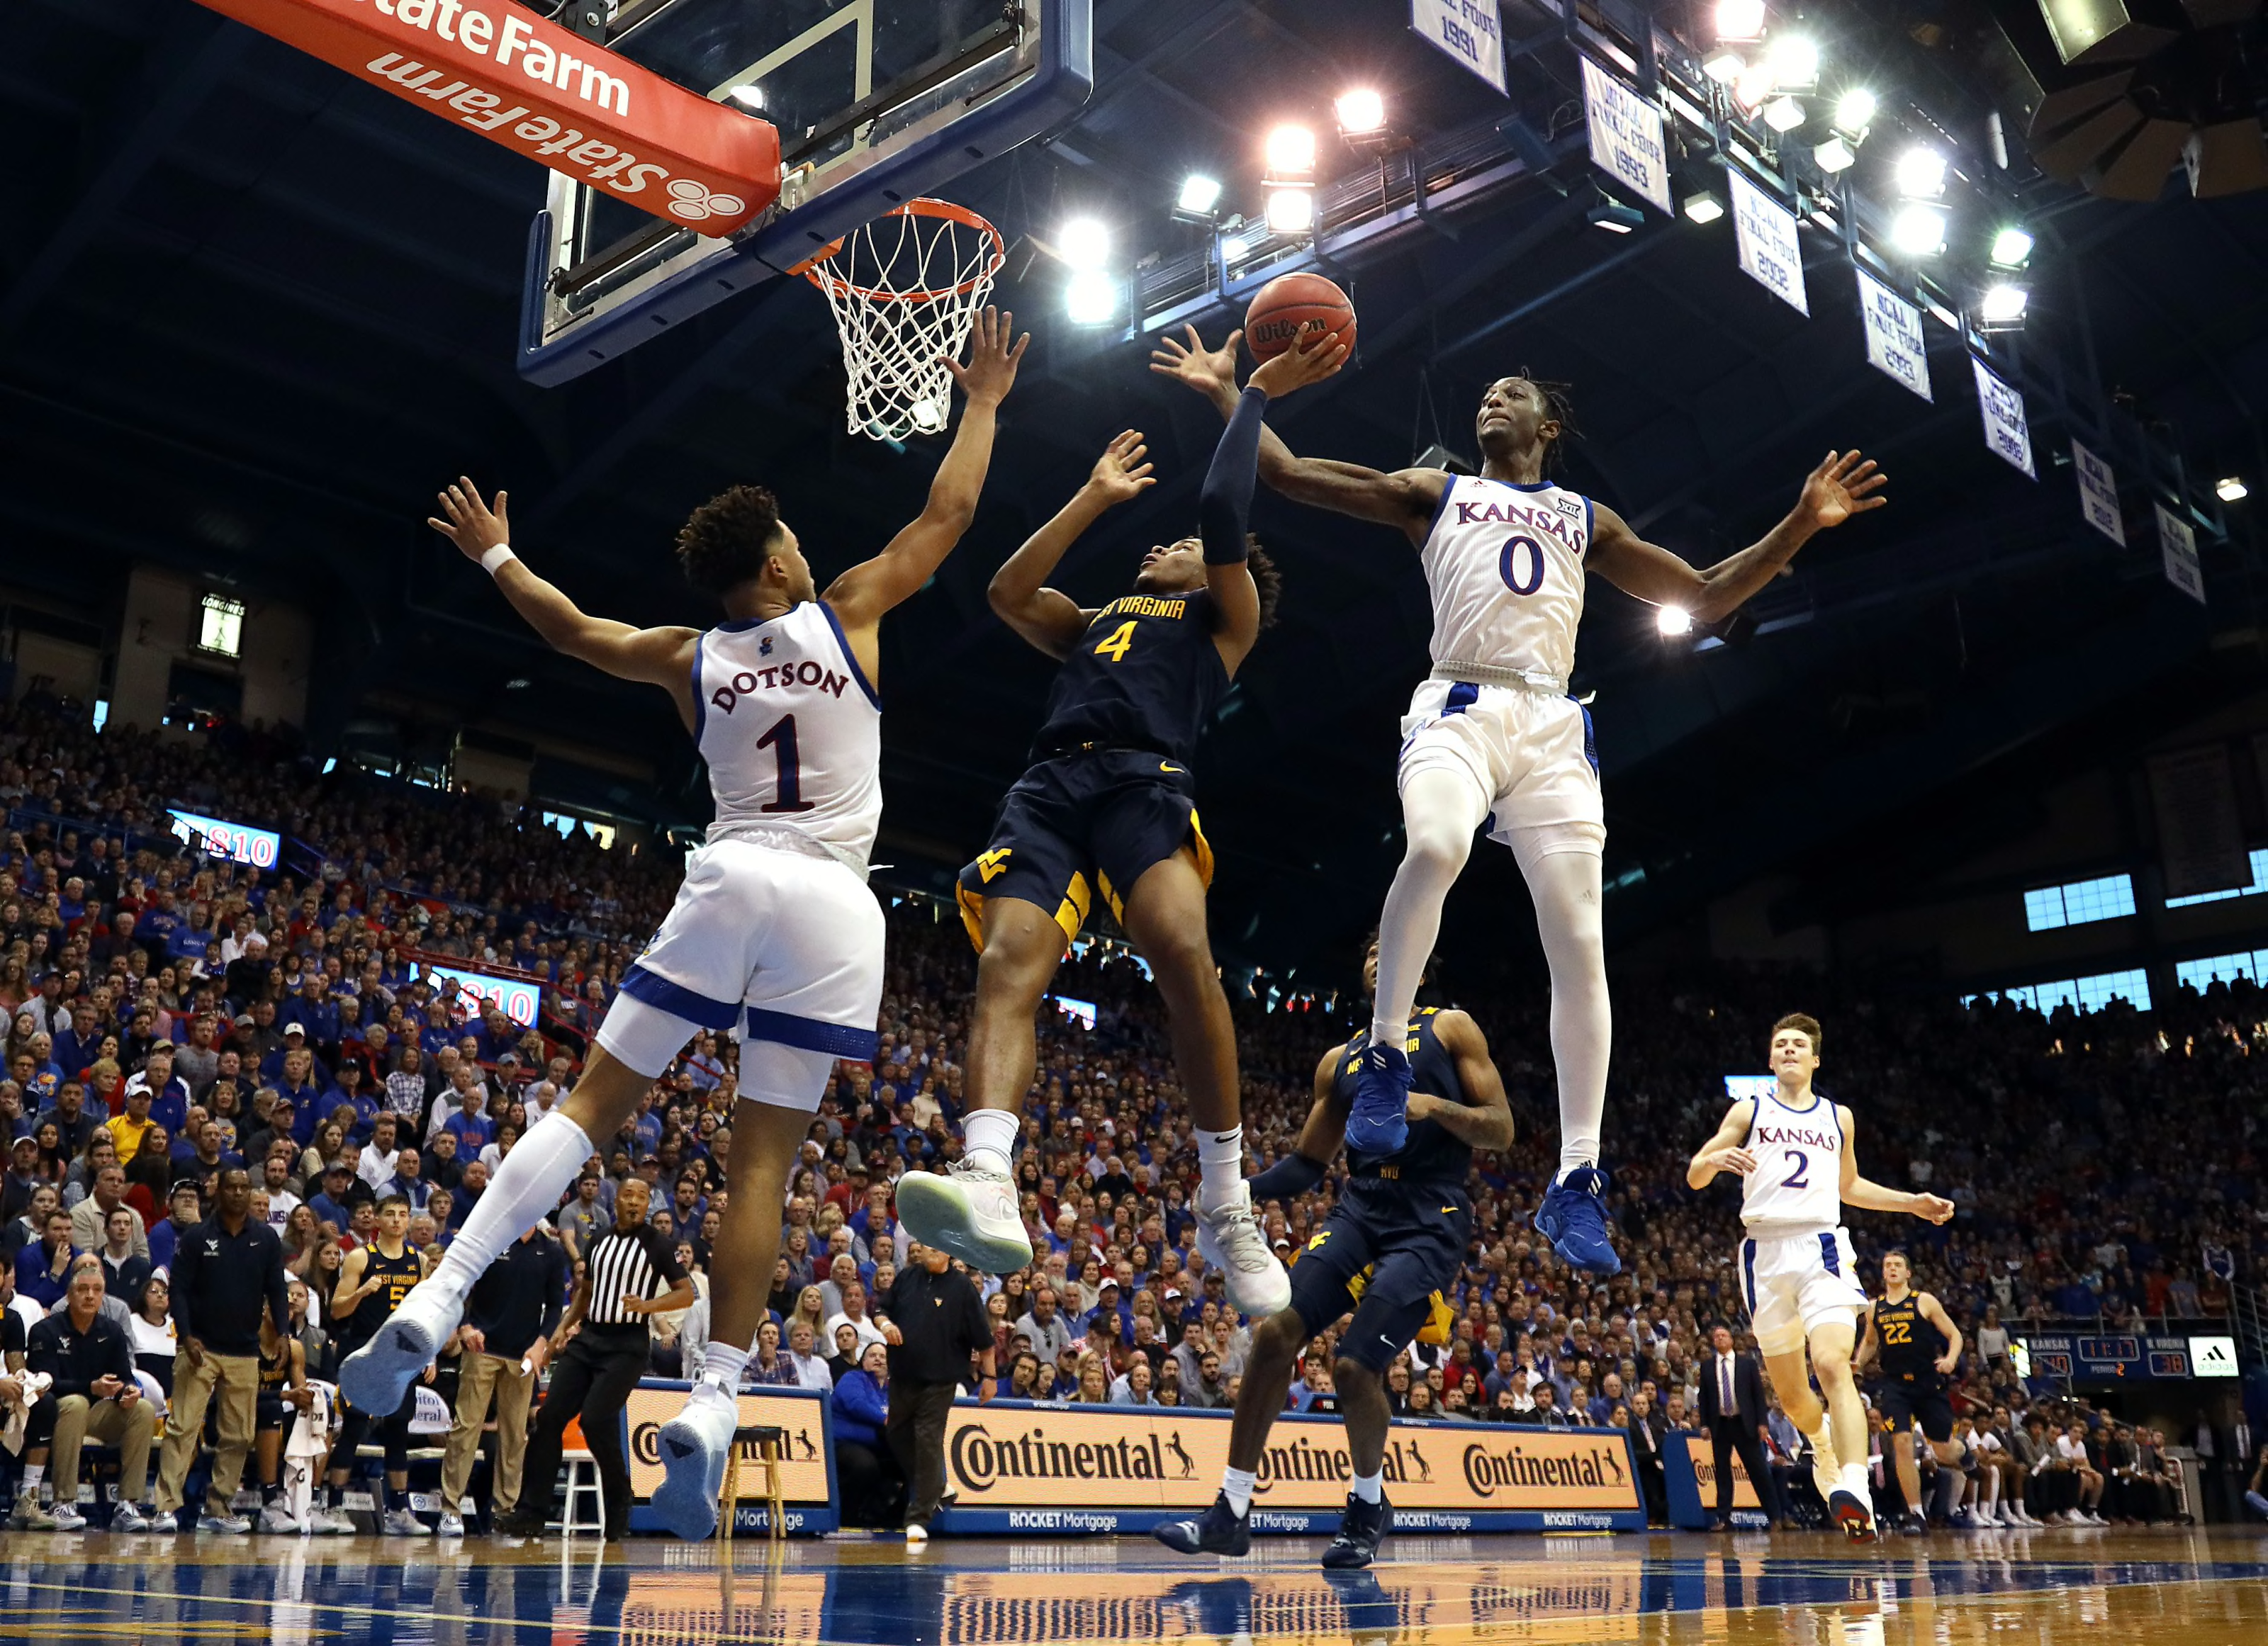 Kansas basketball: Four Big 12 foes who could challenge the Jayhawks